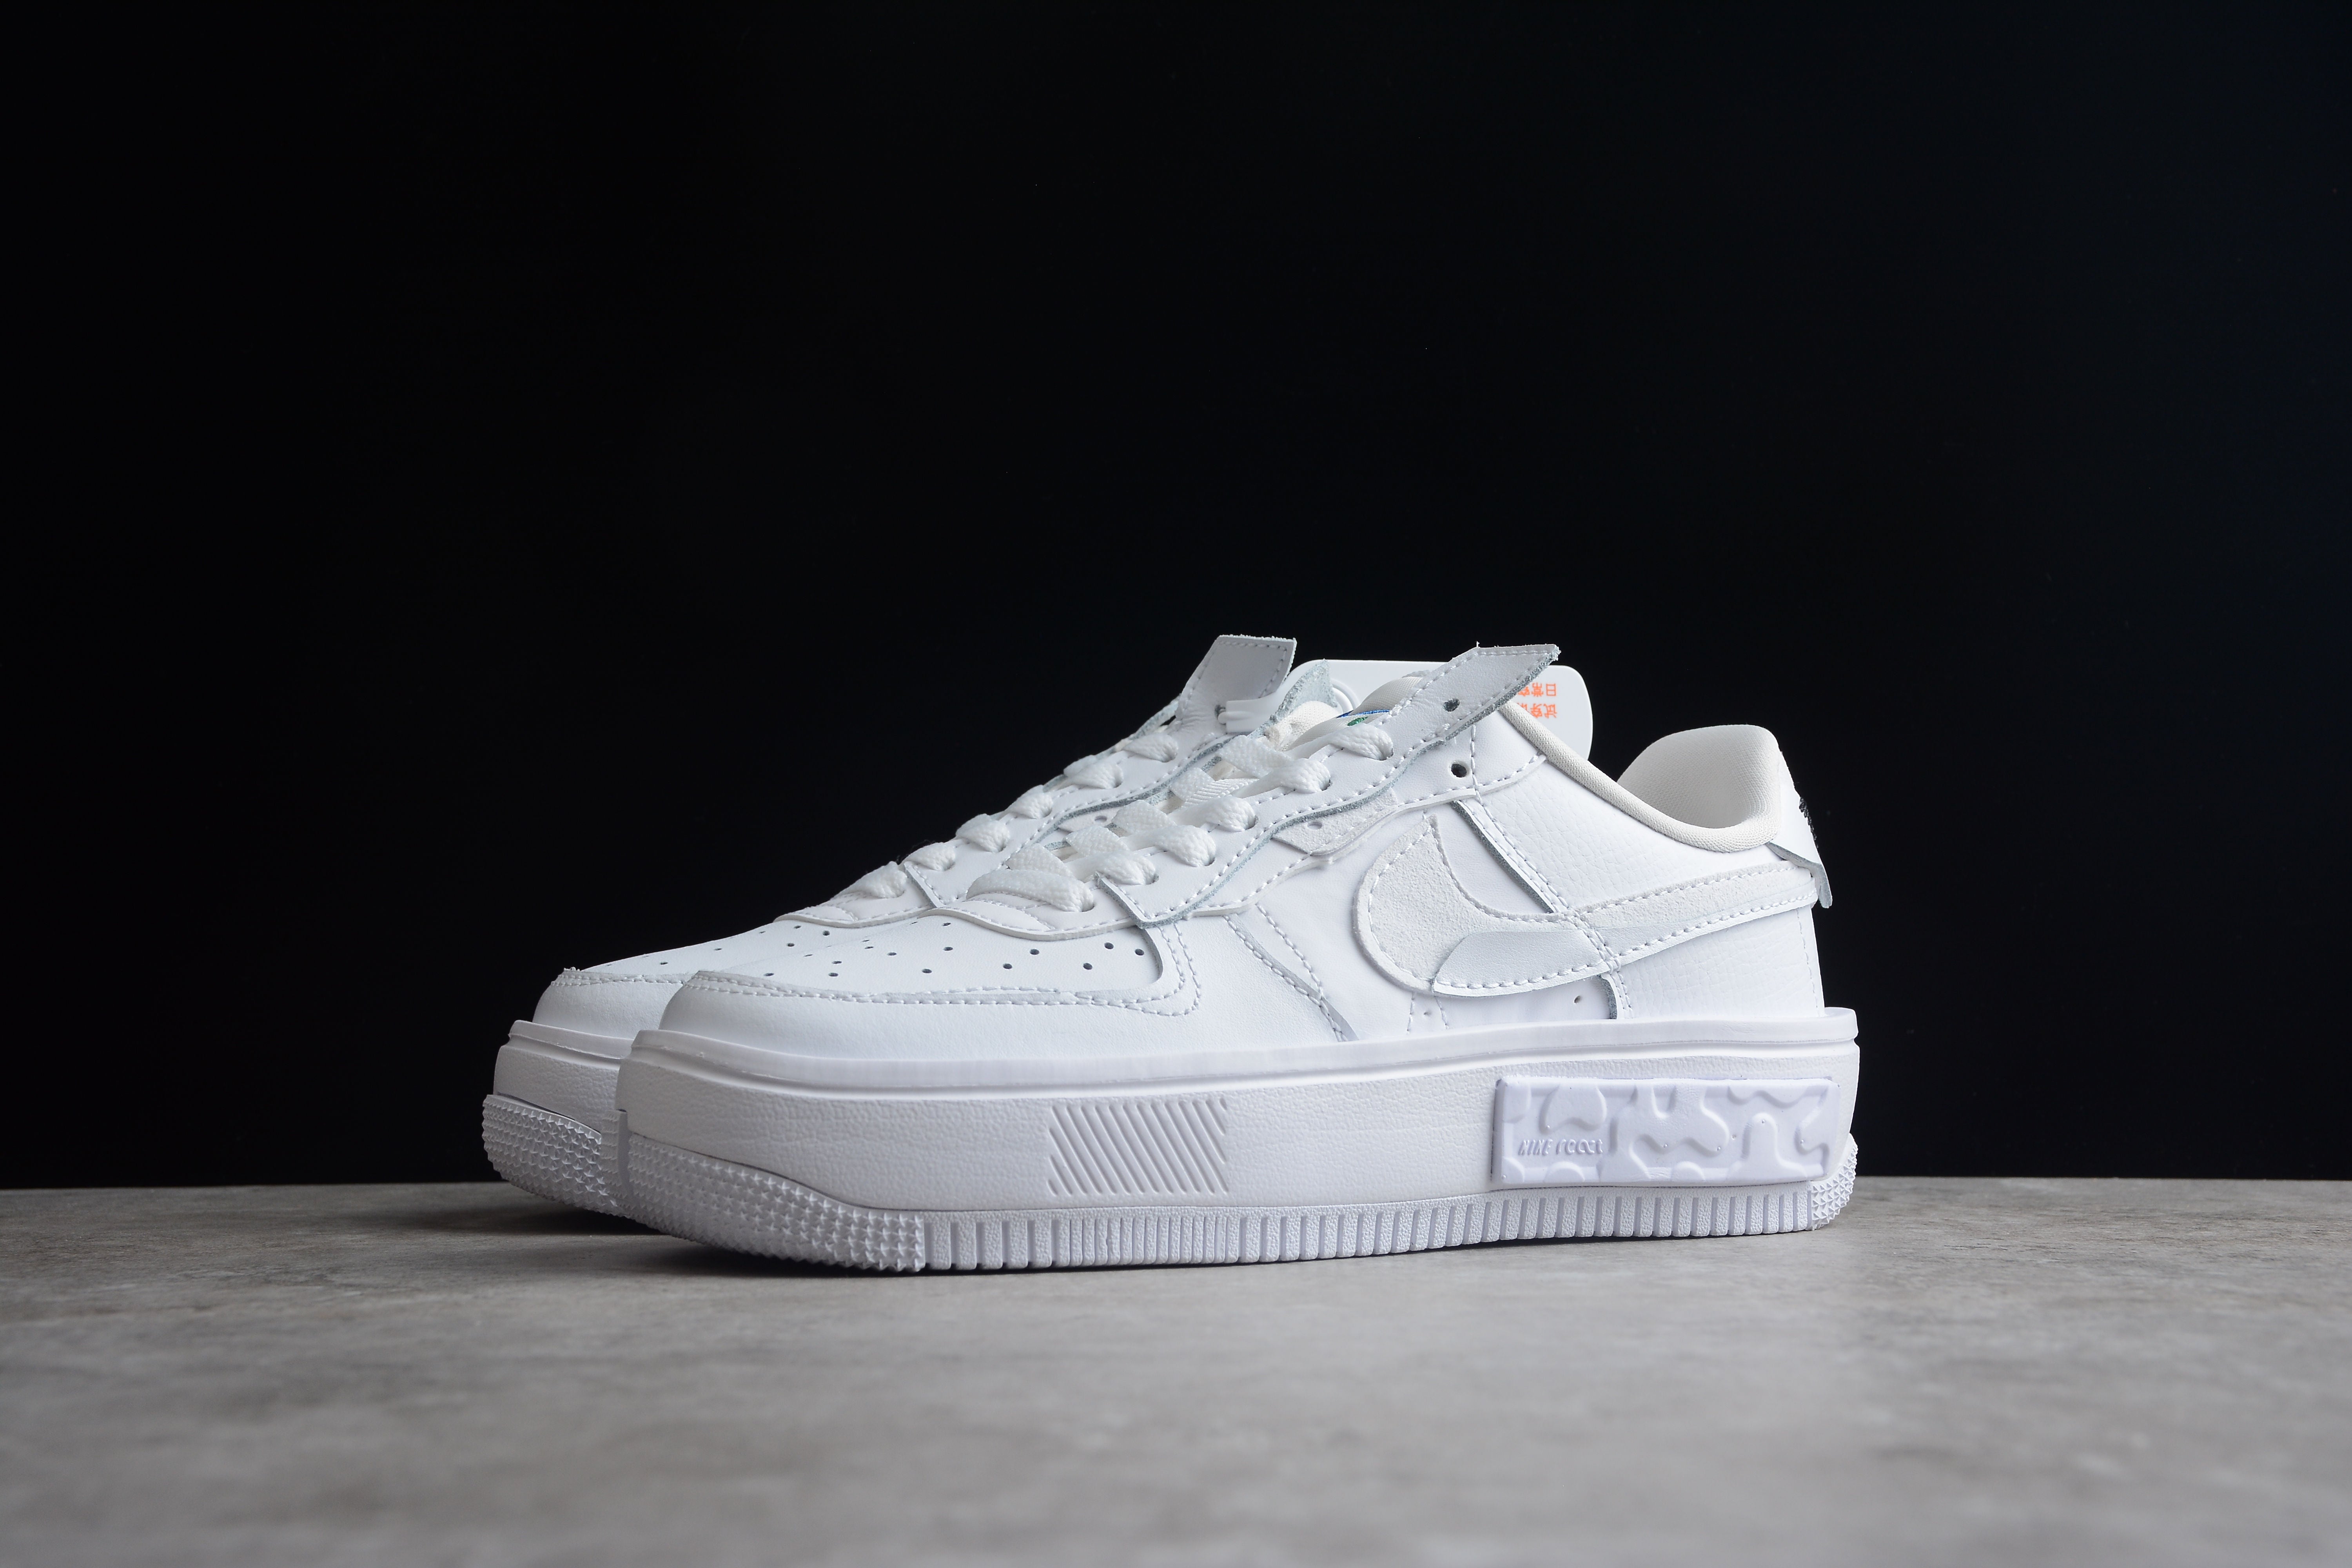 Nike airforce A1 full white shoes